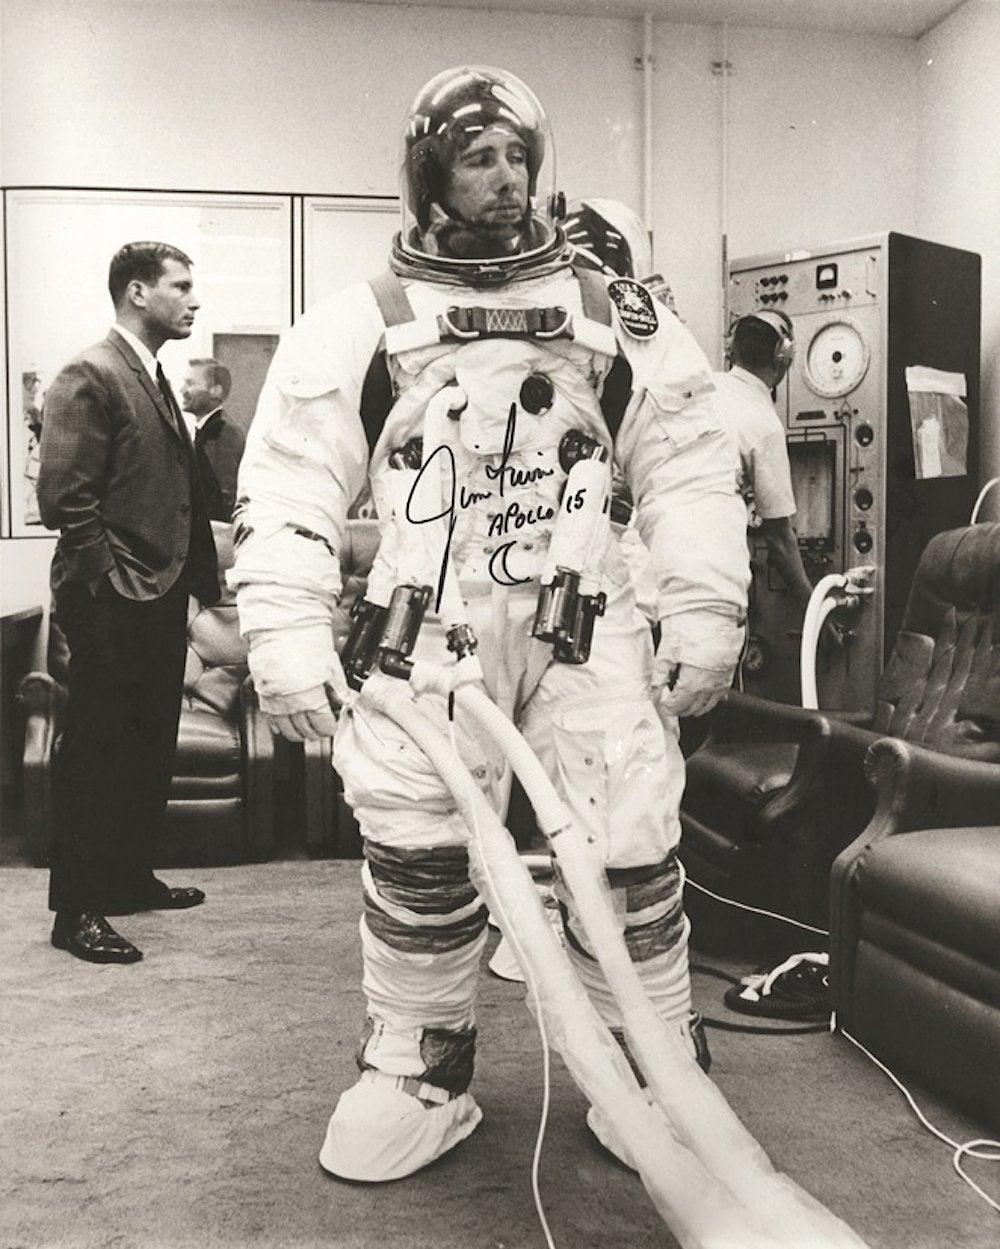 A black and white signed photograph of Apollo 15 Lunar Module pilot Jim Irwin, the eighth man on the moon
James Irwin (1930 – 1991) was an American aviator and NASA astronaut who became the eighth man to walk on the moon during the Apollo 15